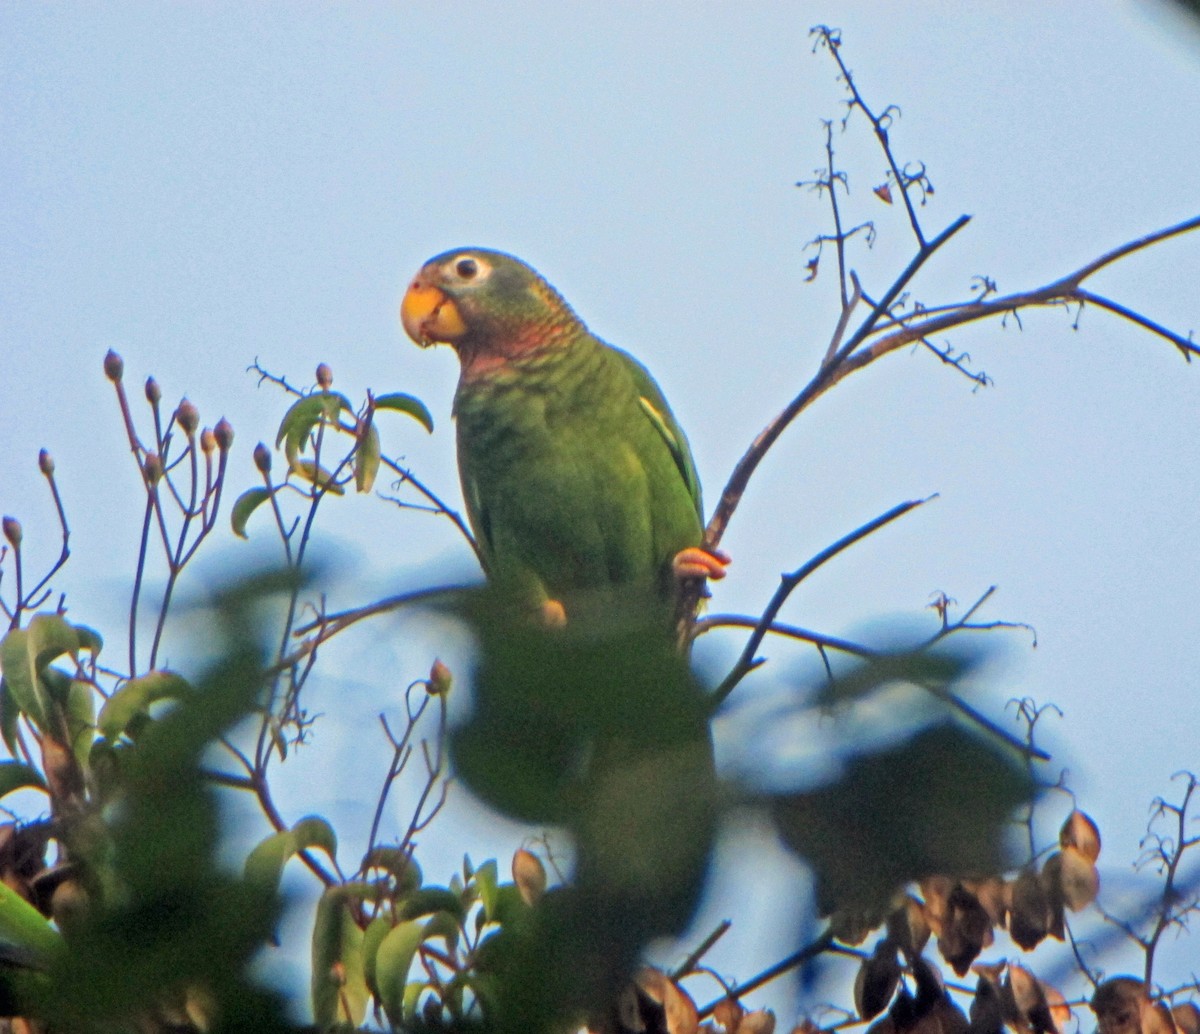 Yellow-billed Parrot - Roger Robb